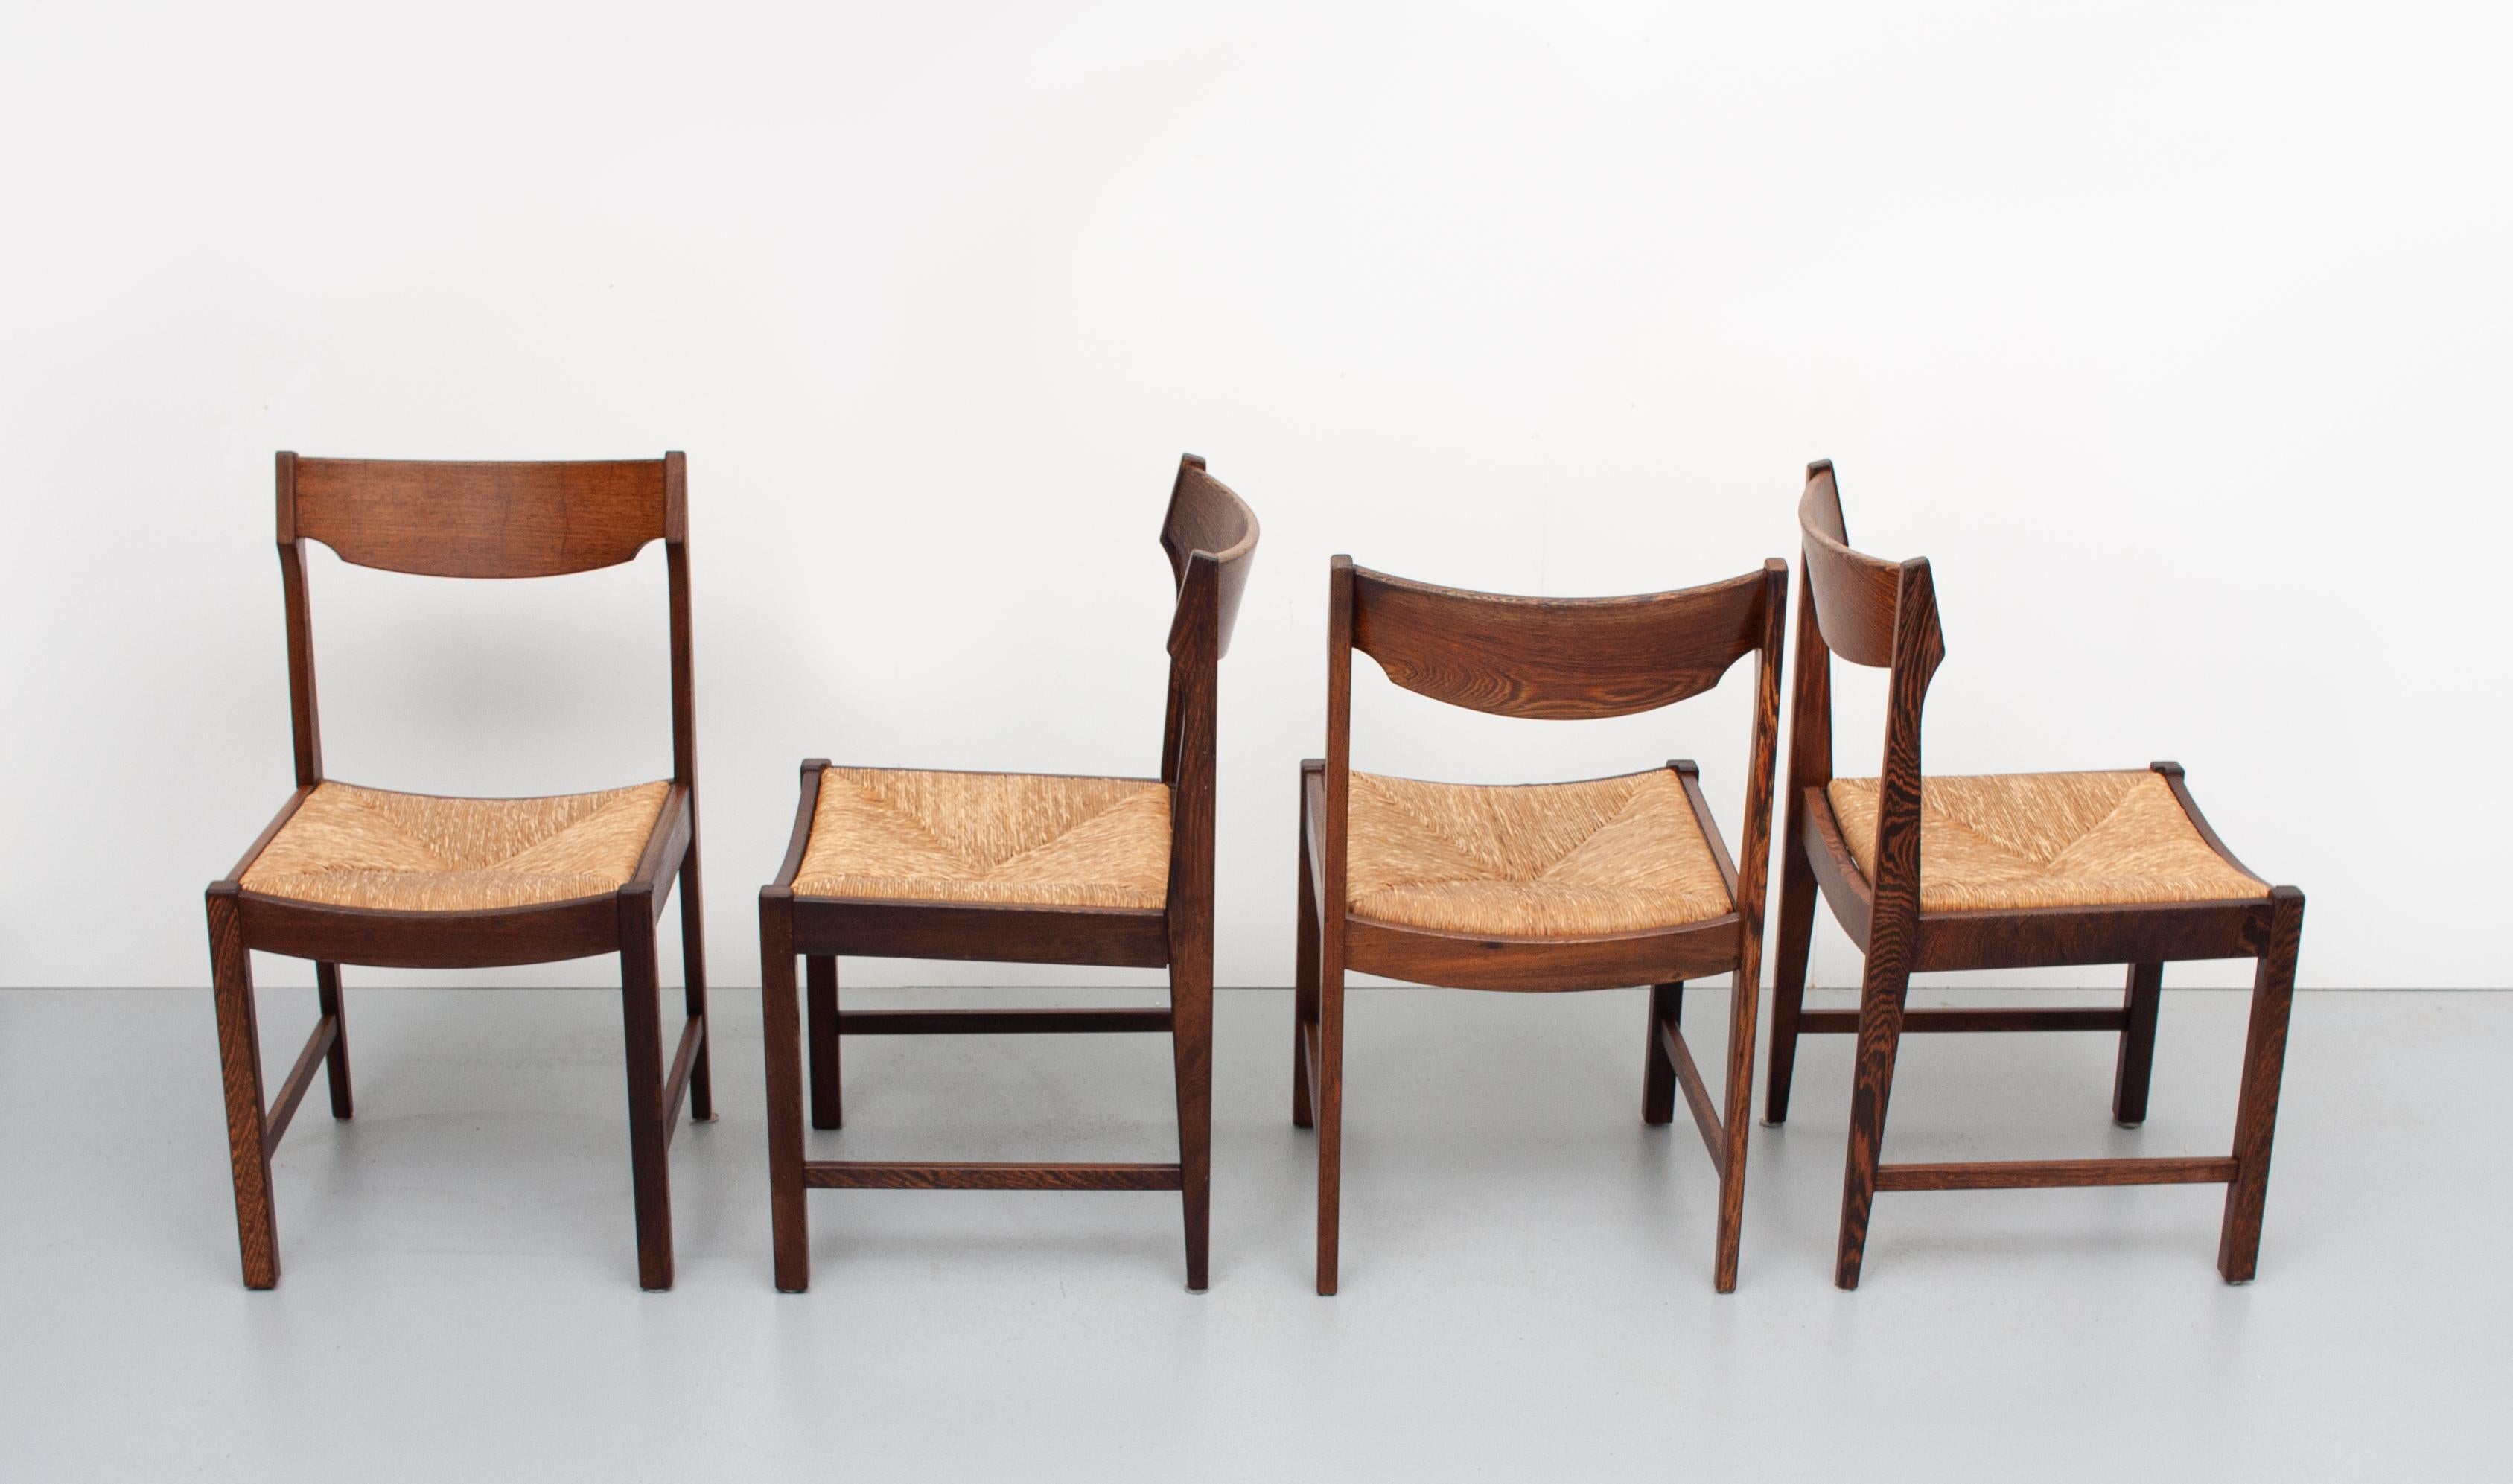 4 dining chairs. Solid Wengé frame, comes with a rattan seat. Very nice organic shaped chairs,
1960s. Holland Martin Visser. Good condition.